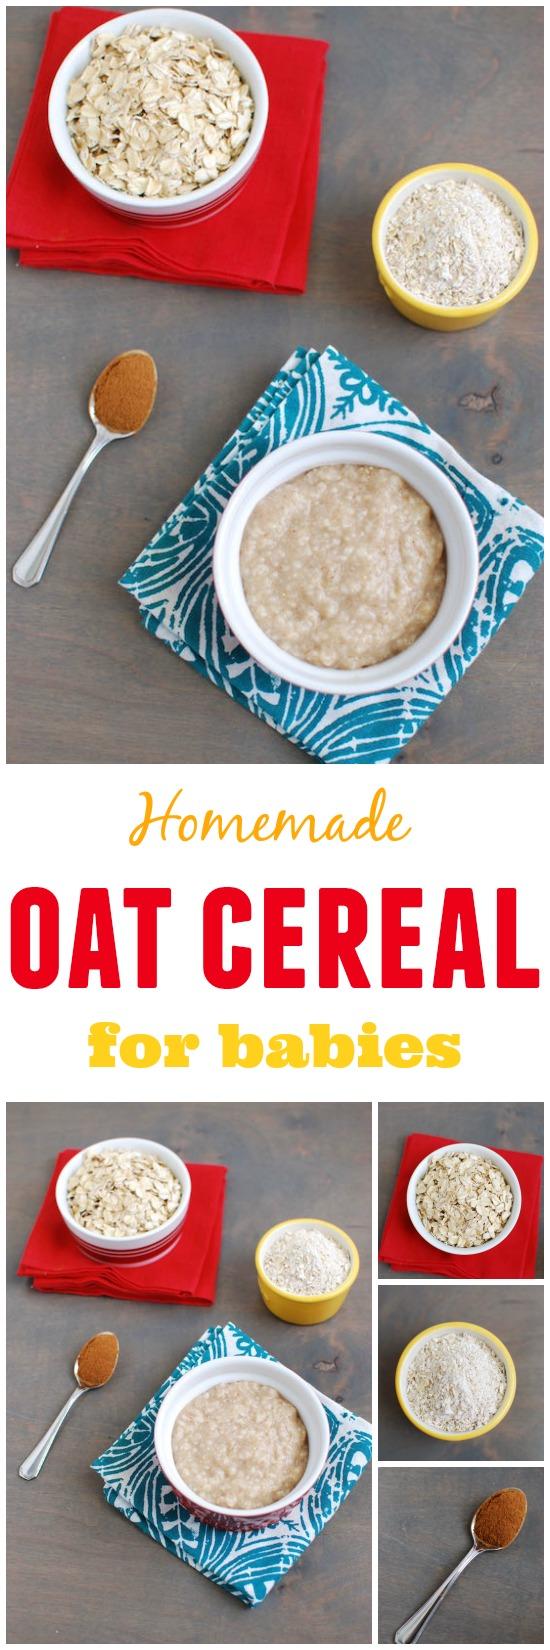 Learn how to make baby oatmeal! You're just 3 ingredients away from homemade baby oatmeal cereal.